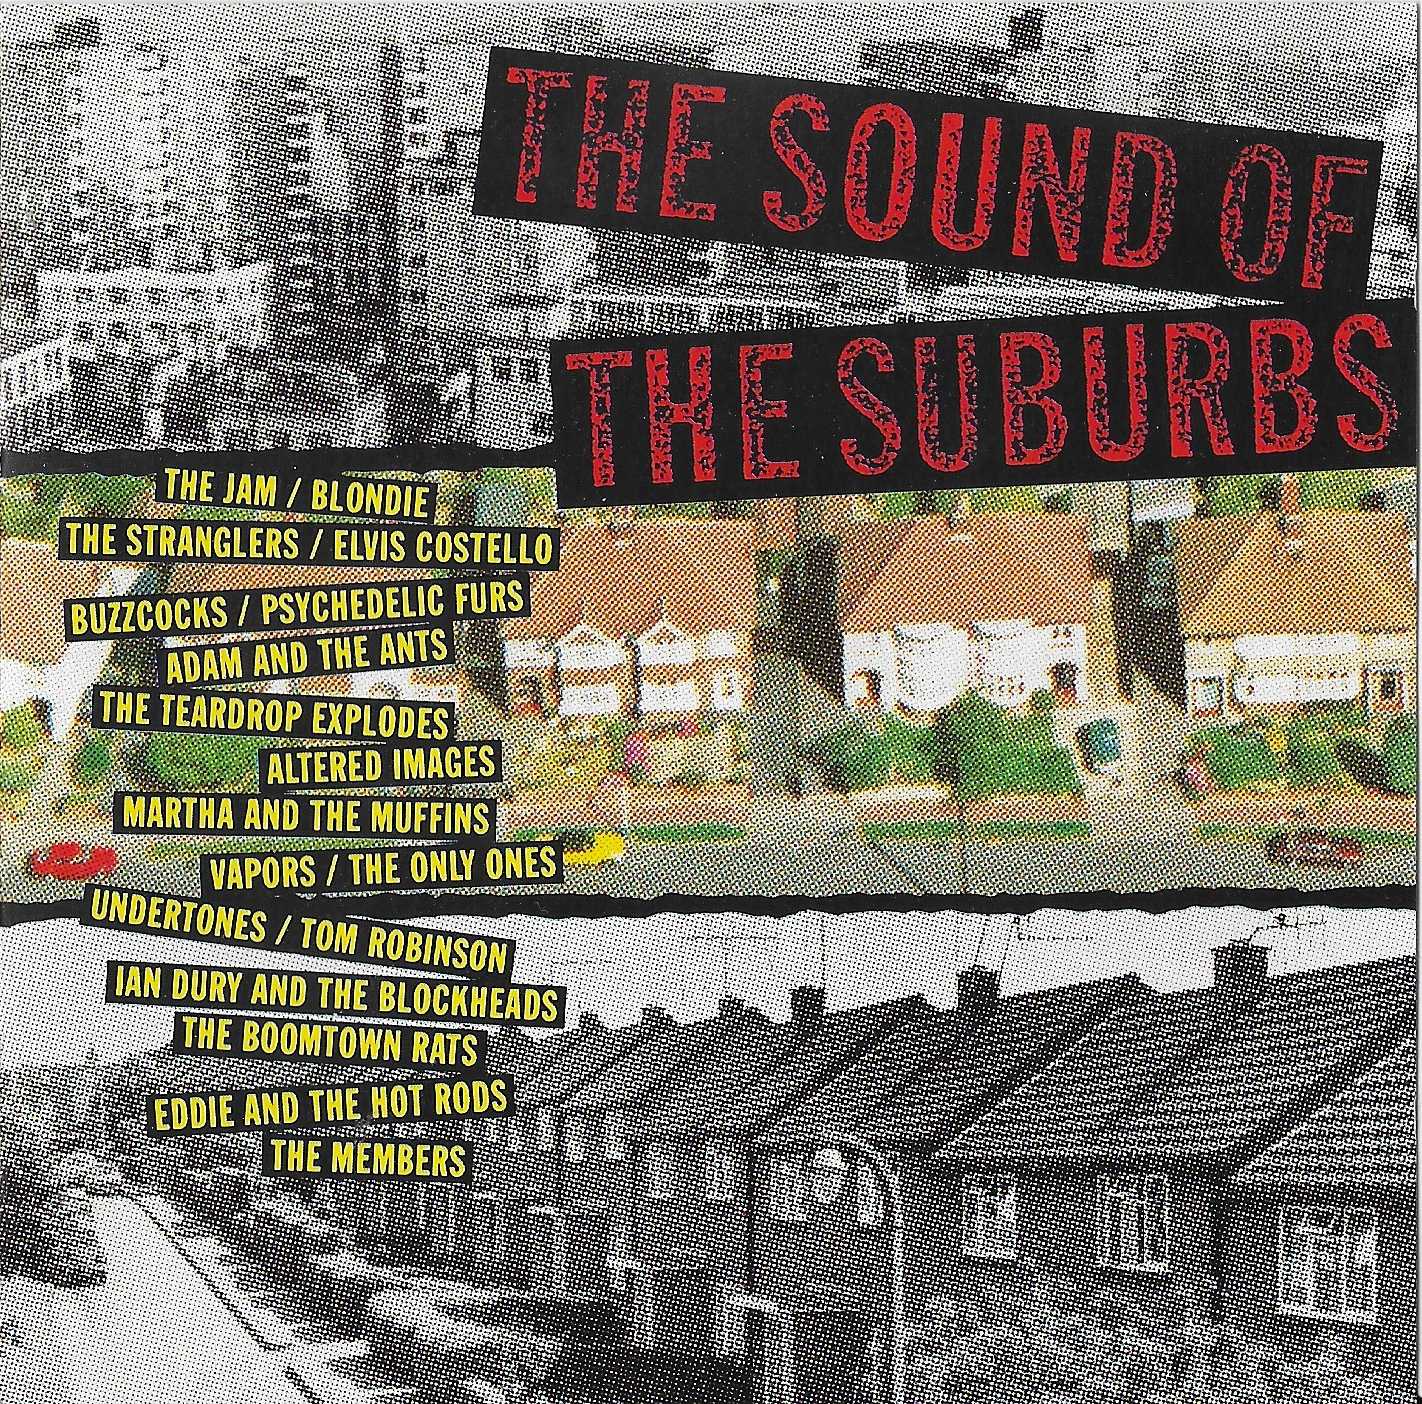 Picture of MOODCD 18 The sound of the suburbs by artist Various 